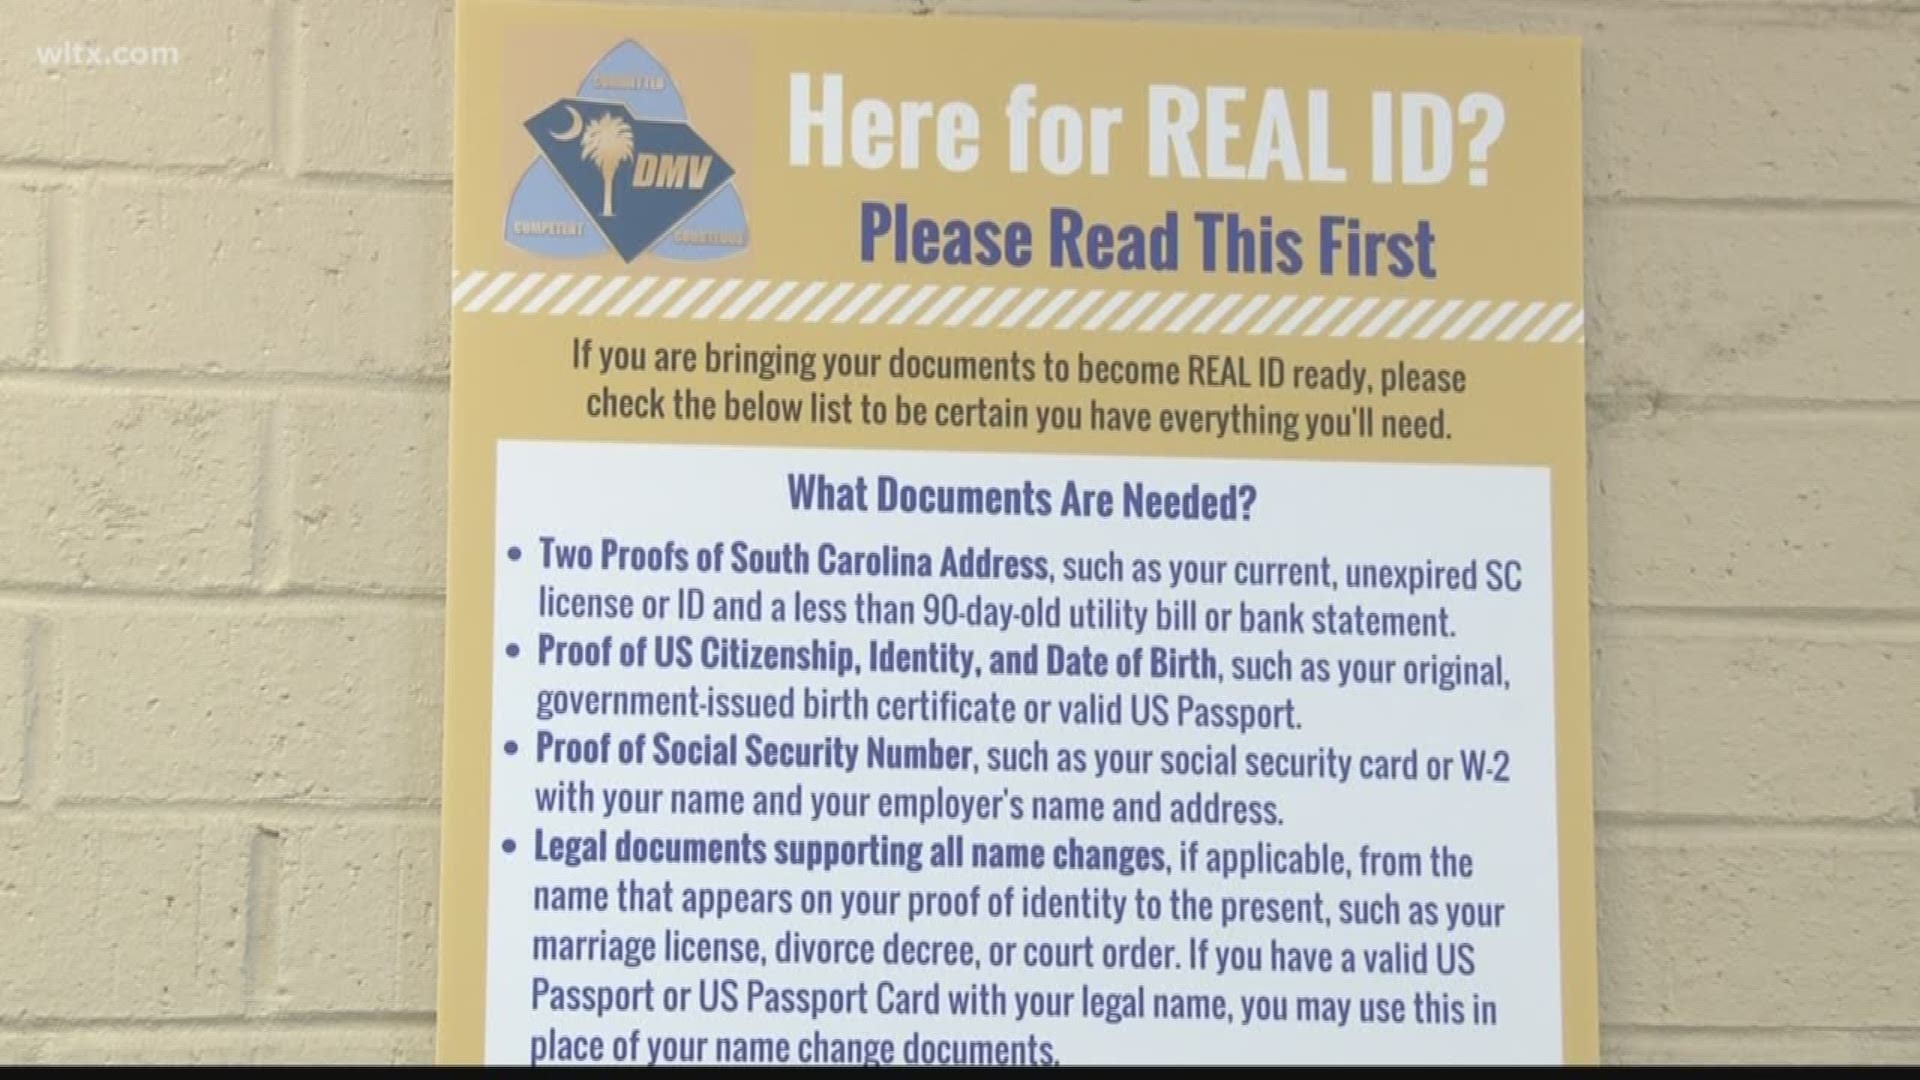 Effective Oct. 1, 2020, South Carolina residents will need Real IDs to fly on airplanes, go into federal buildings or on military bases.